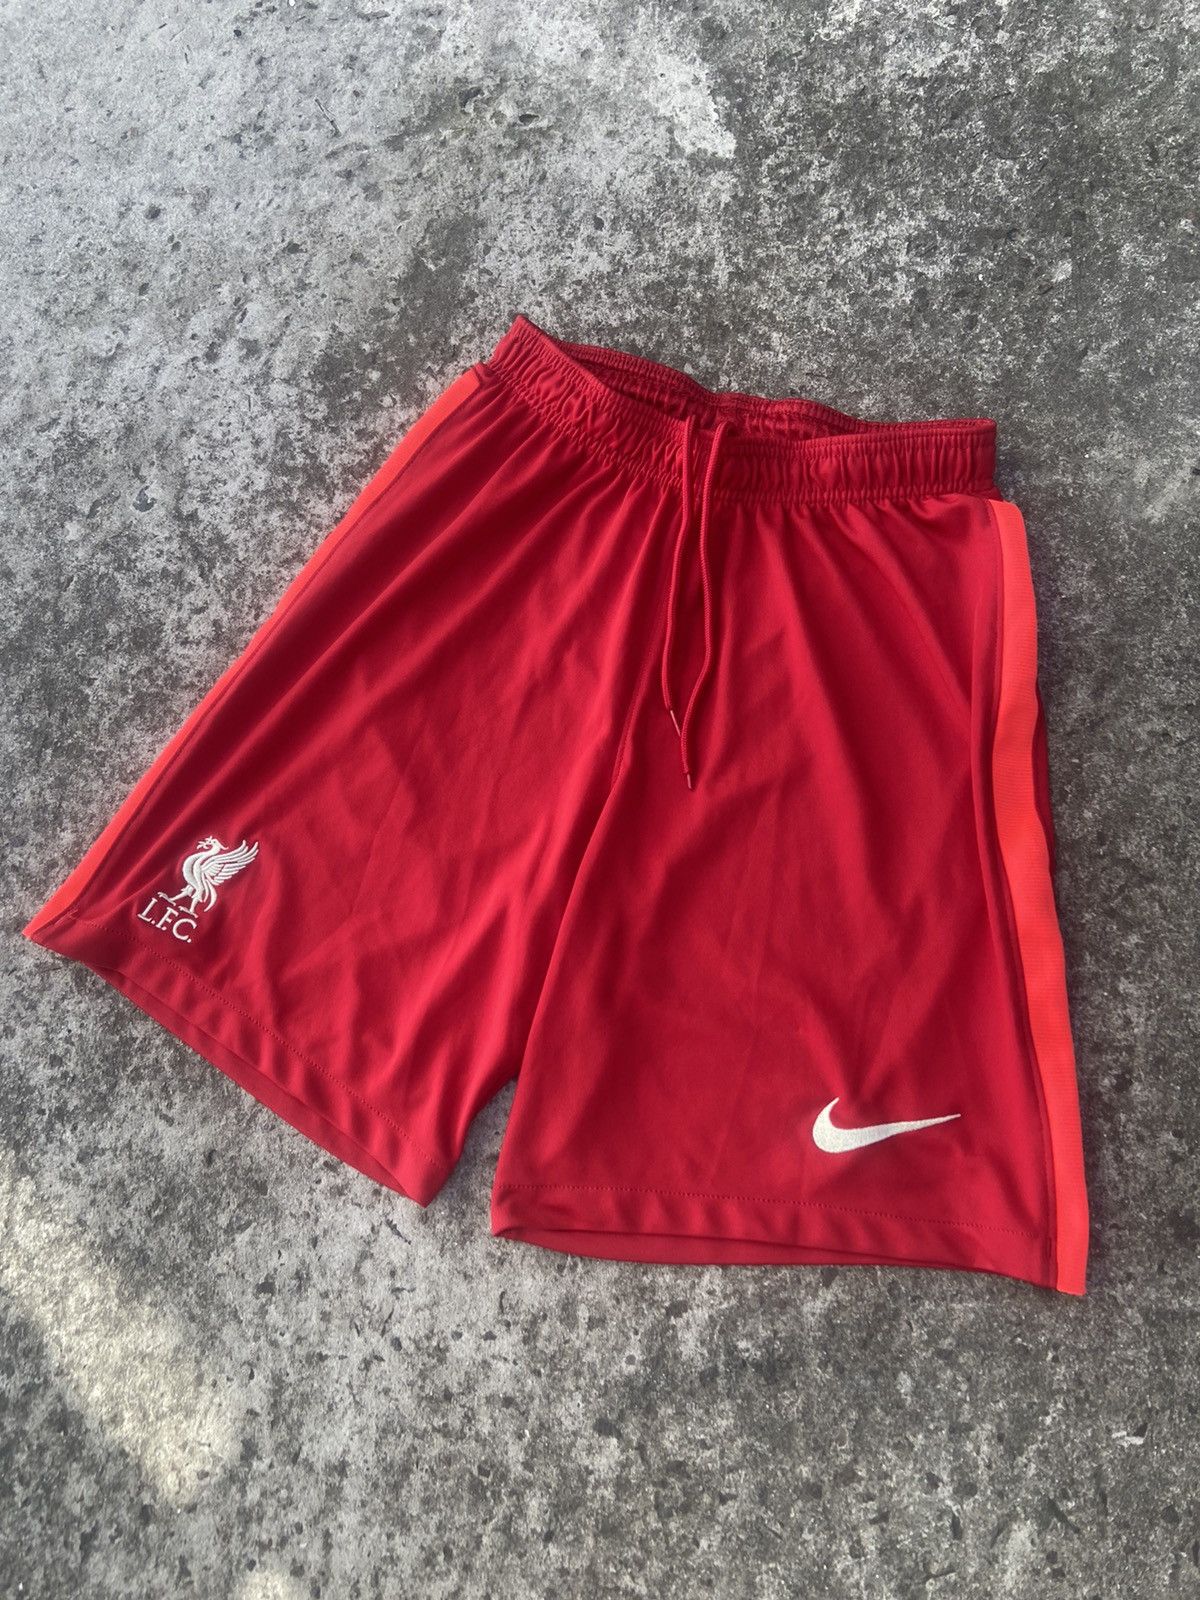 Pre-owned Liverpool X Nike Liverpool Shorts Streetwear Football Blokecore Vtg In Red